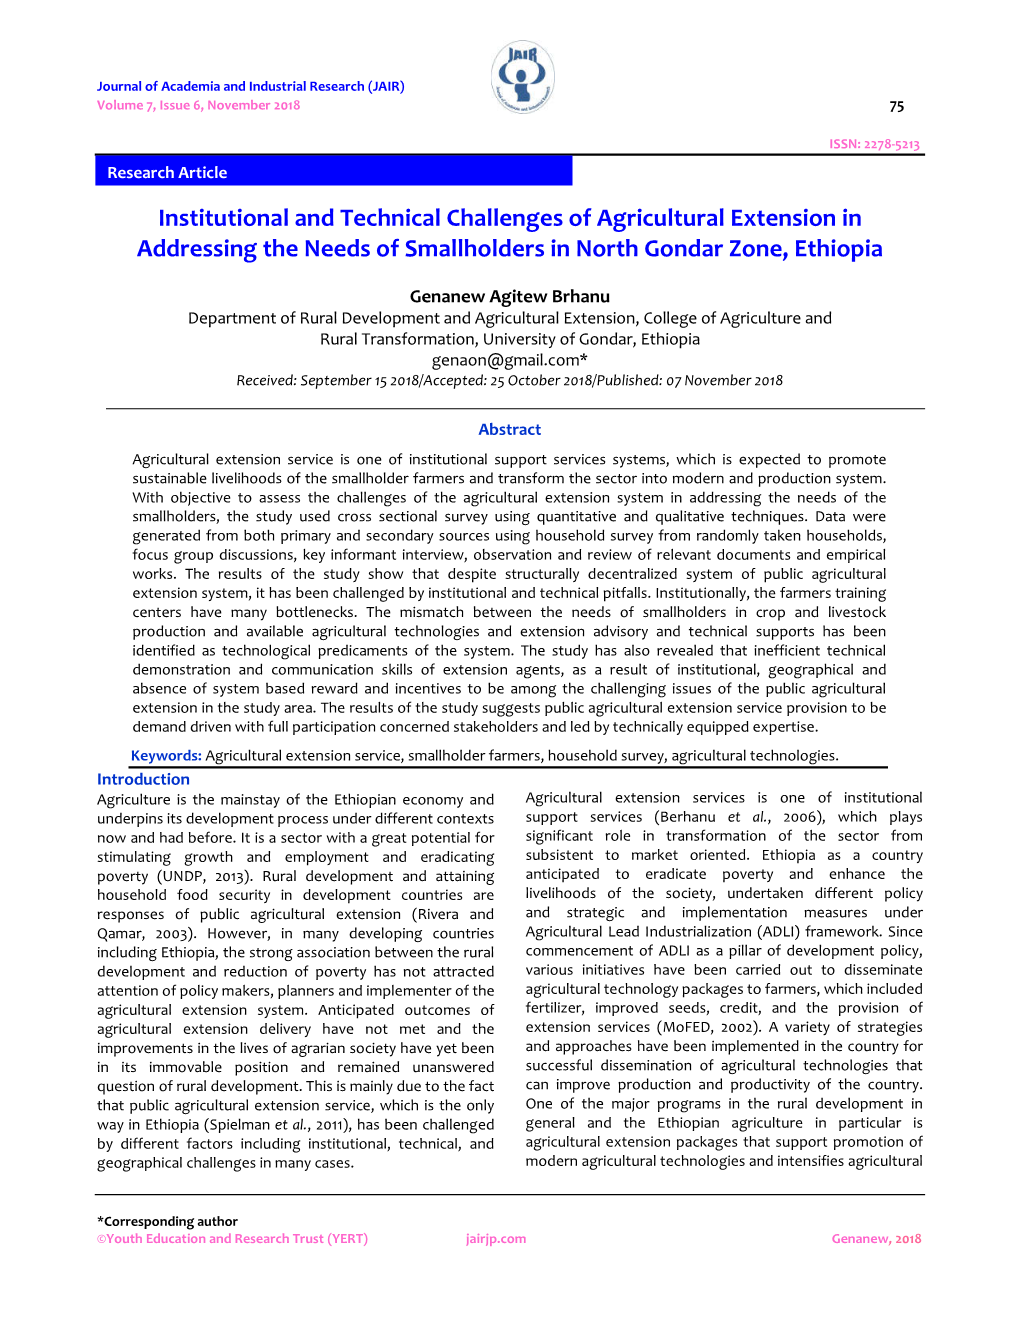 Institutional and Technical Challenges of Agricultural Extension in Addressing the Needs of Smallholders in North Gondar Zone, Ethiopia